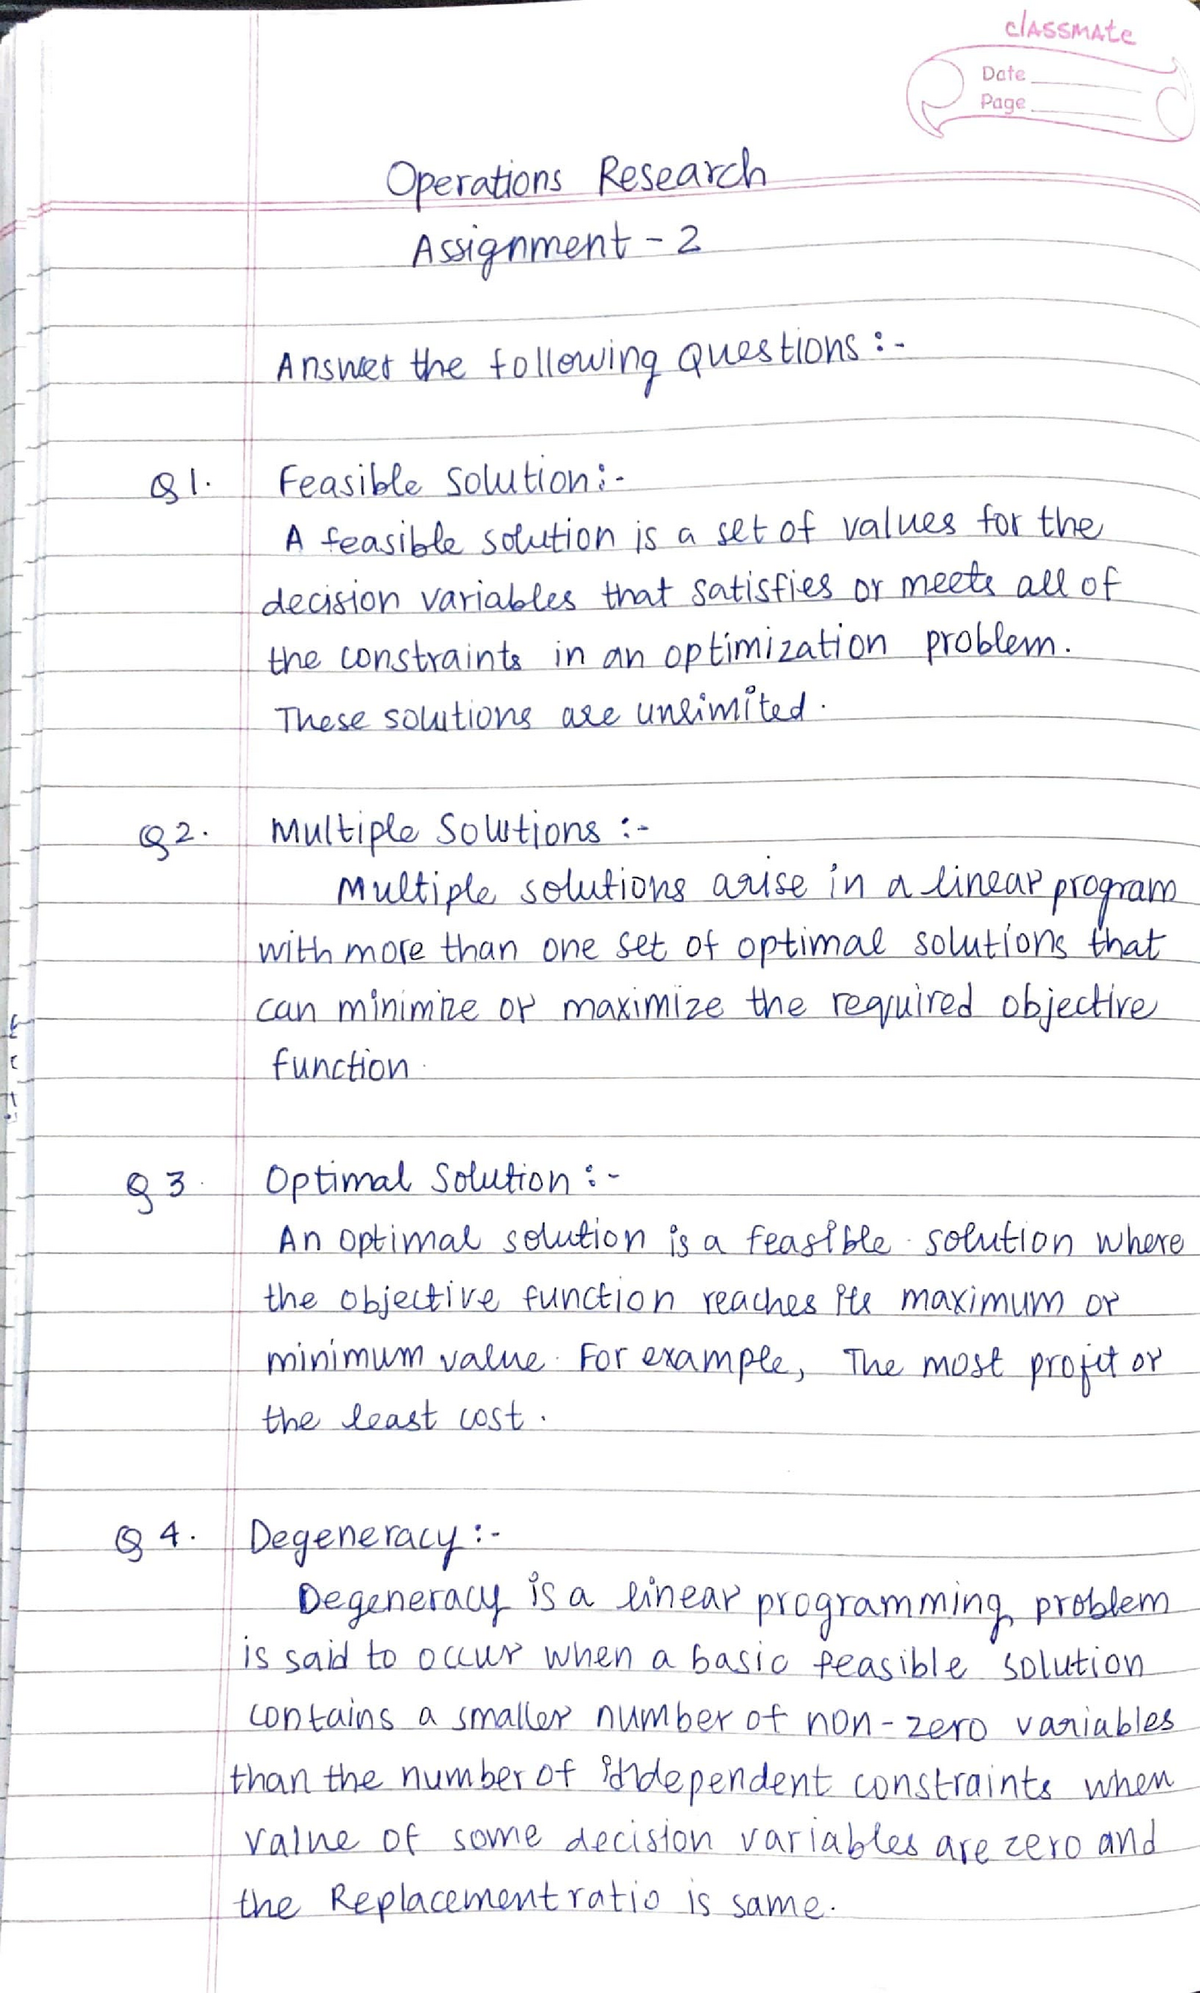 assignment problems in operations research